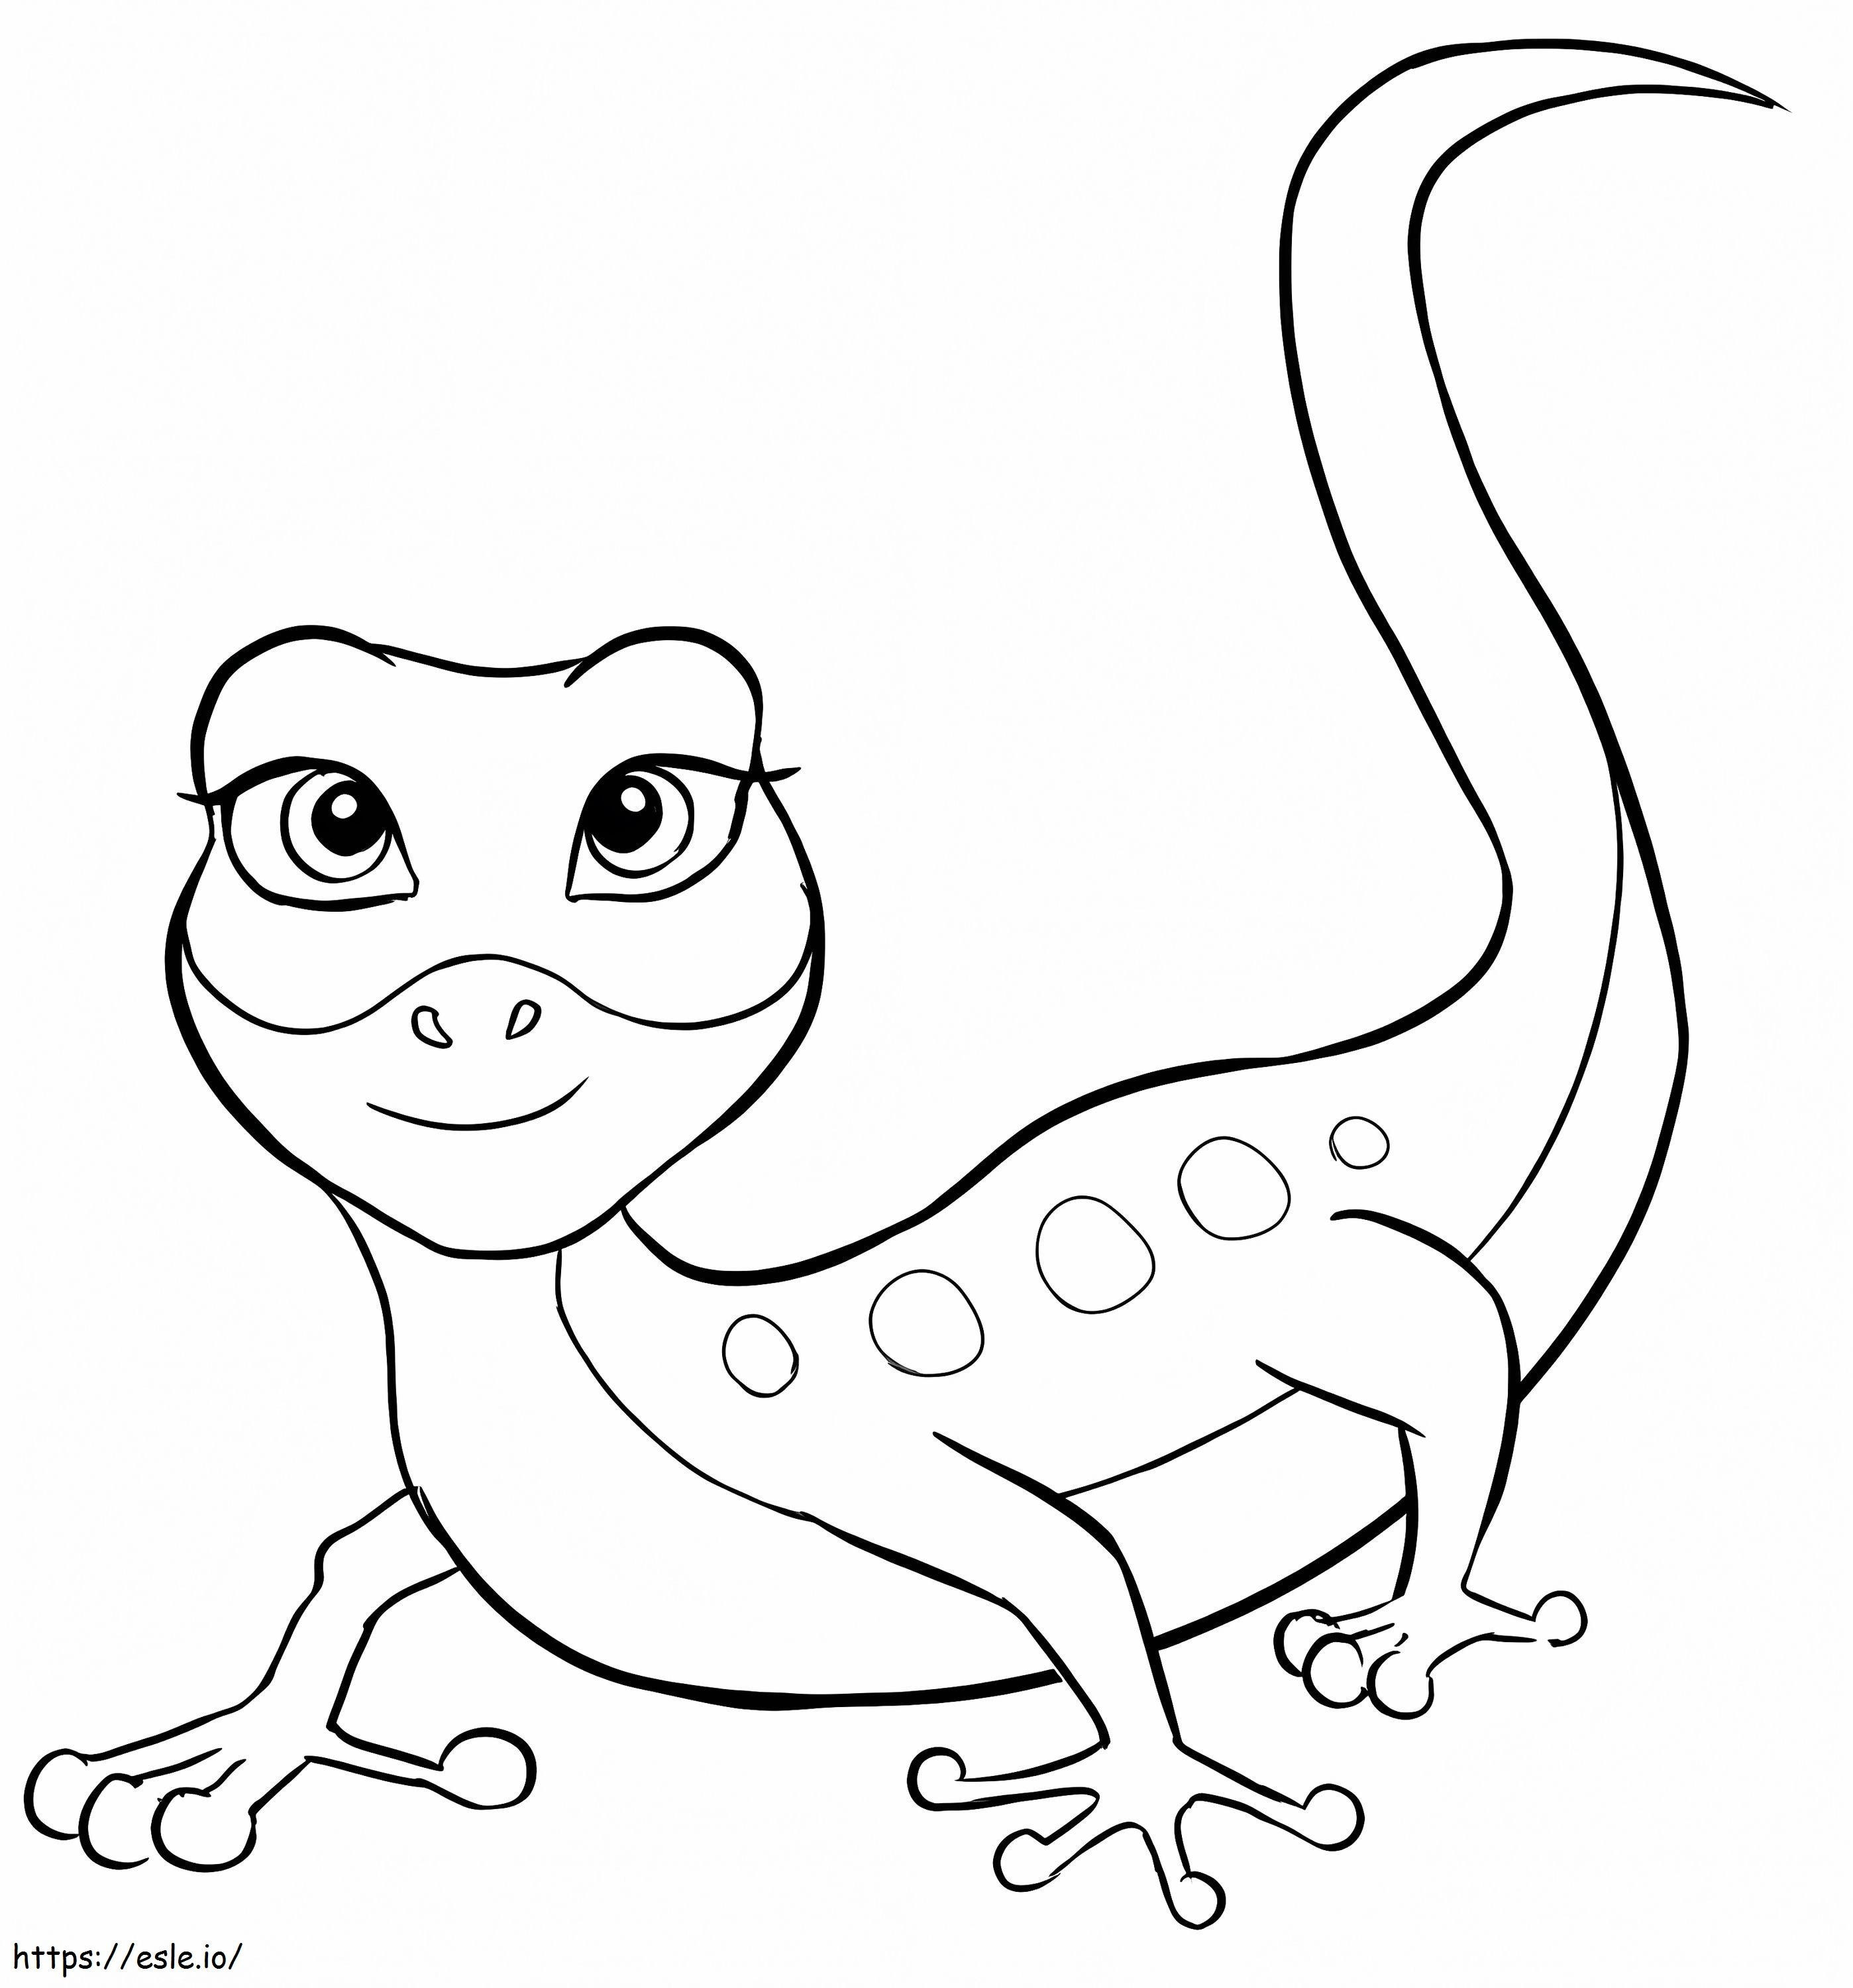 Lovely Newt coloring page